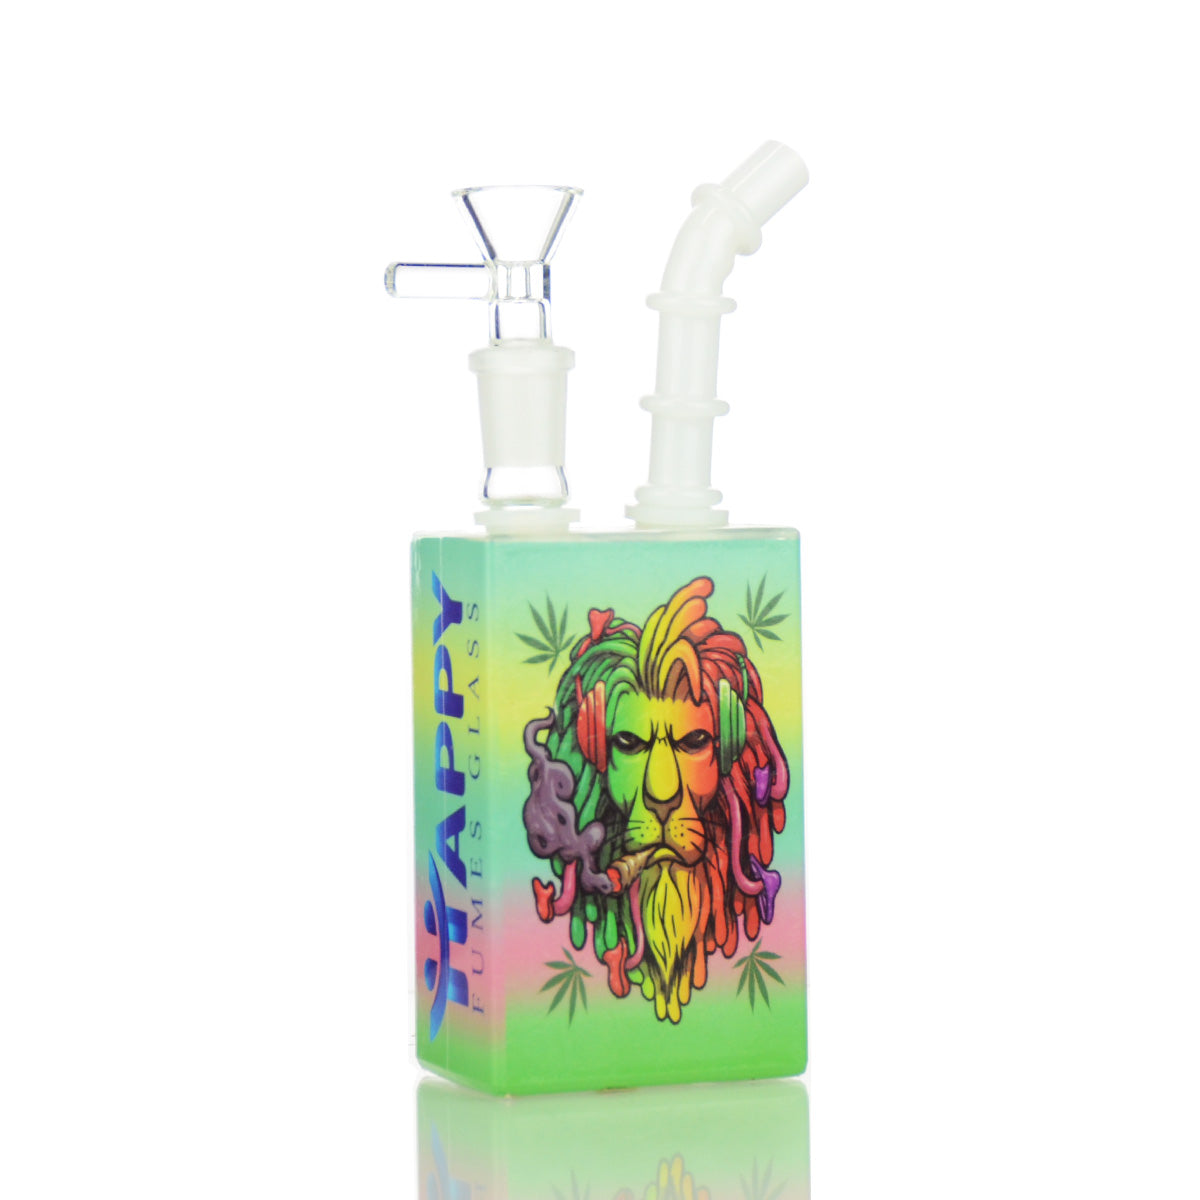 8" Rasta Lion Juice Box Bong Happy Fumes Glass with 14mm Male Bowl